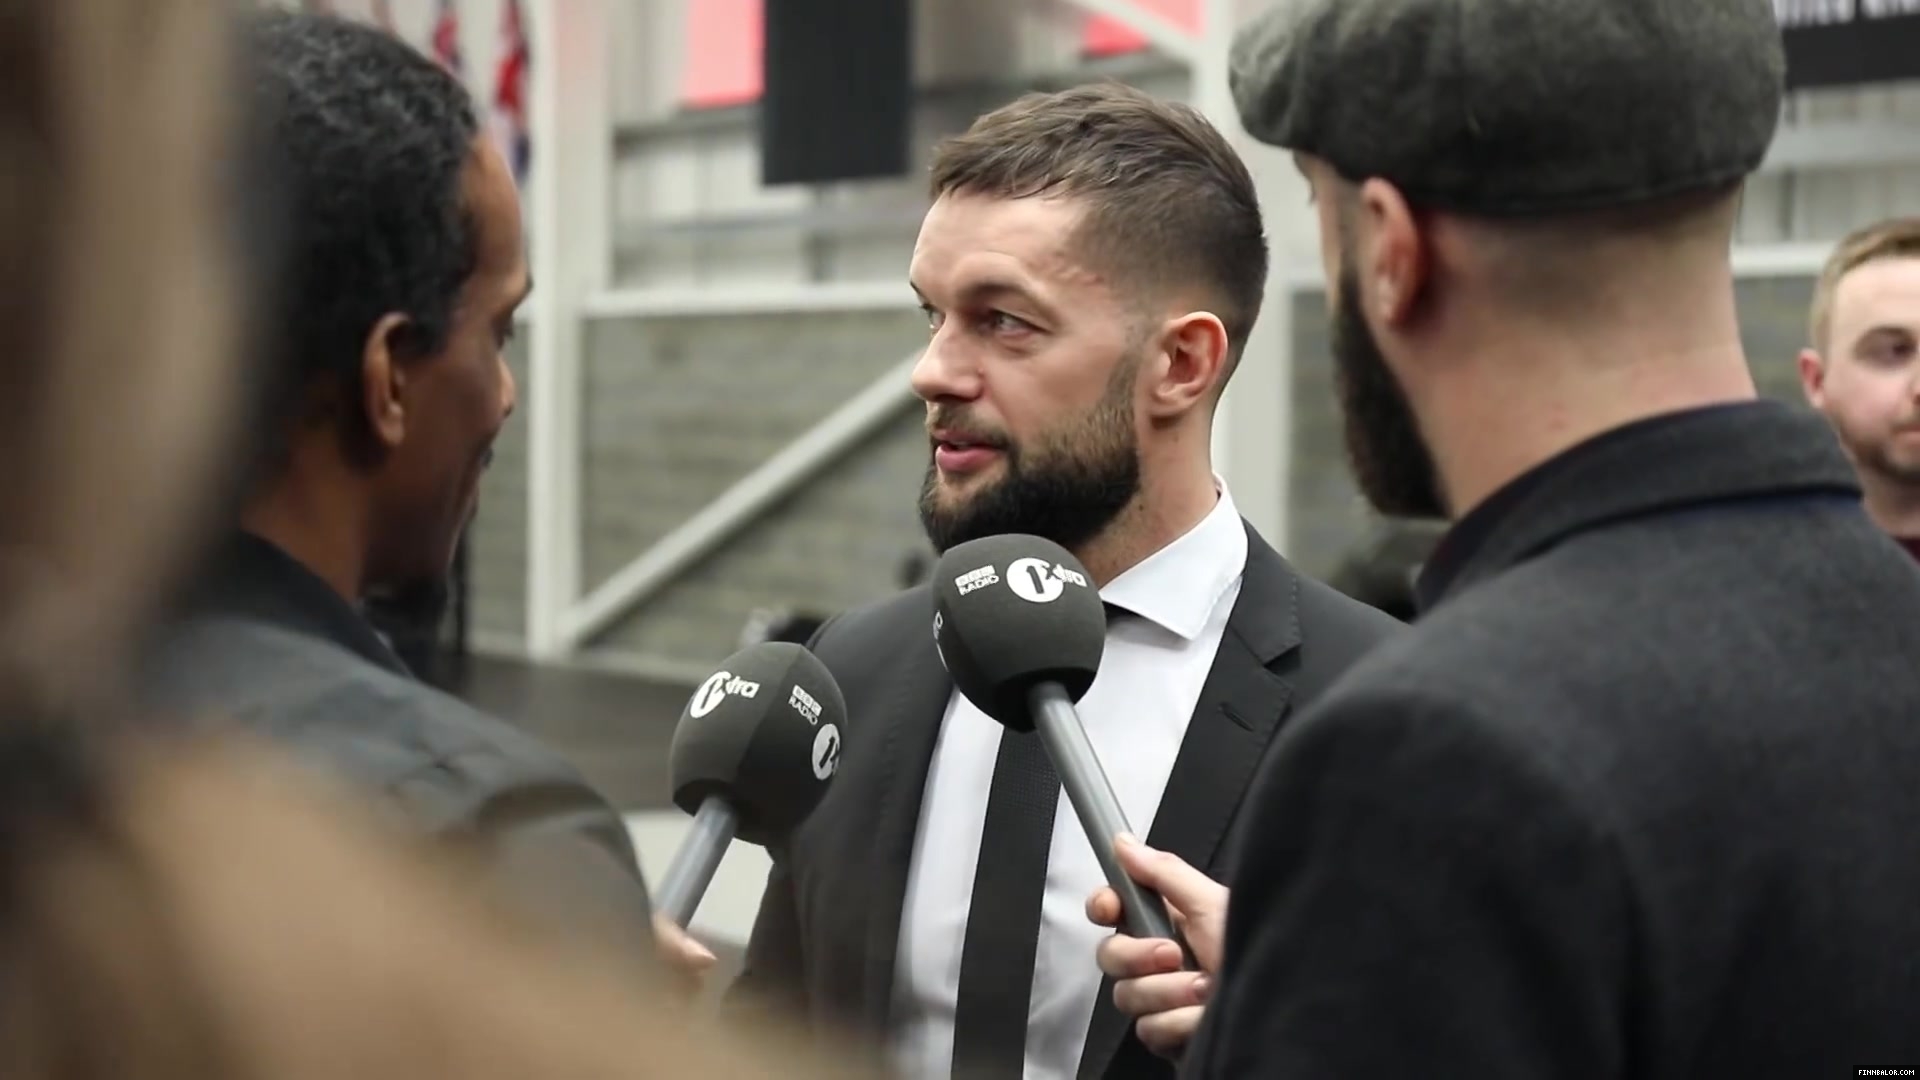 WWE_Superstar_FINN_BALOR_joins_MOUSTACHE_MOUNTAIN_at_the_opening_of_the_NXT_UK_PC_021.jpg